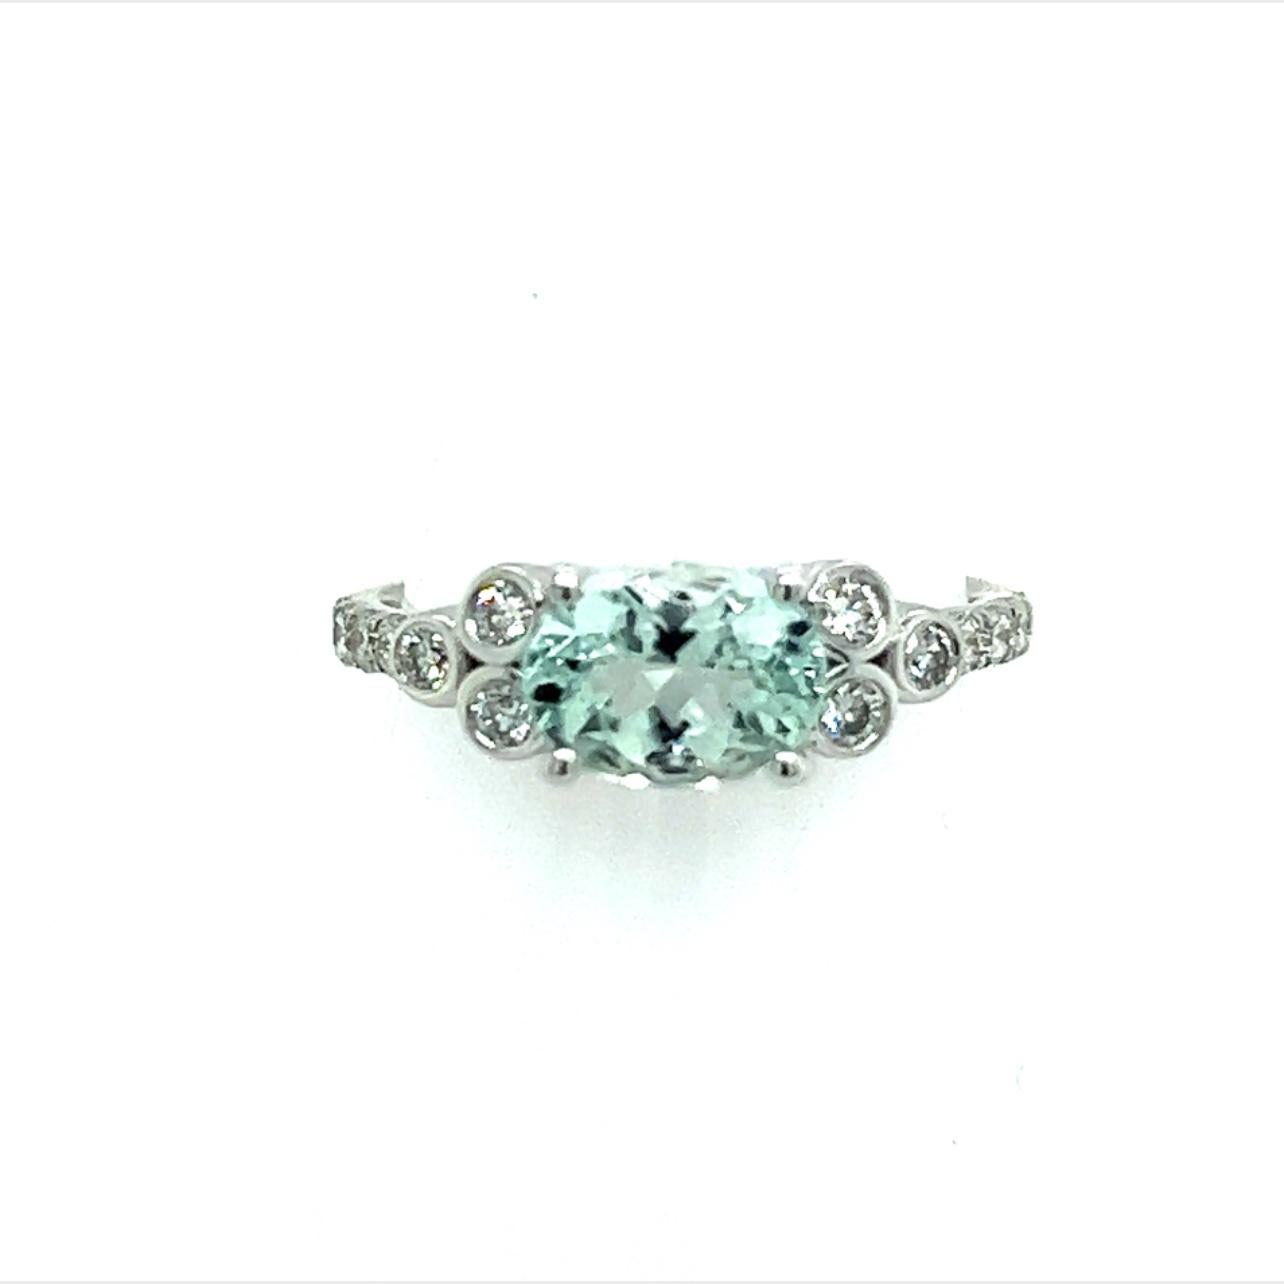 Mixed Cut Natural Aquamarine Diamond Ring 14k W Gold 1.46 TCW Certified For Sale